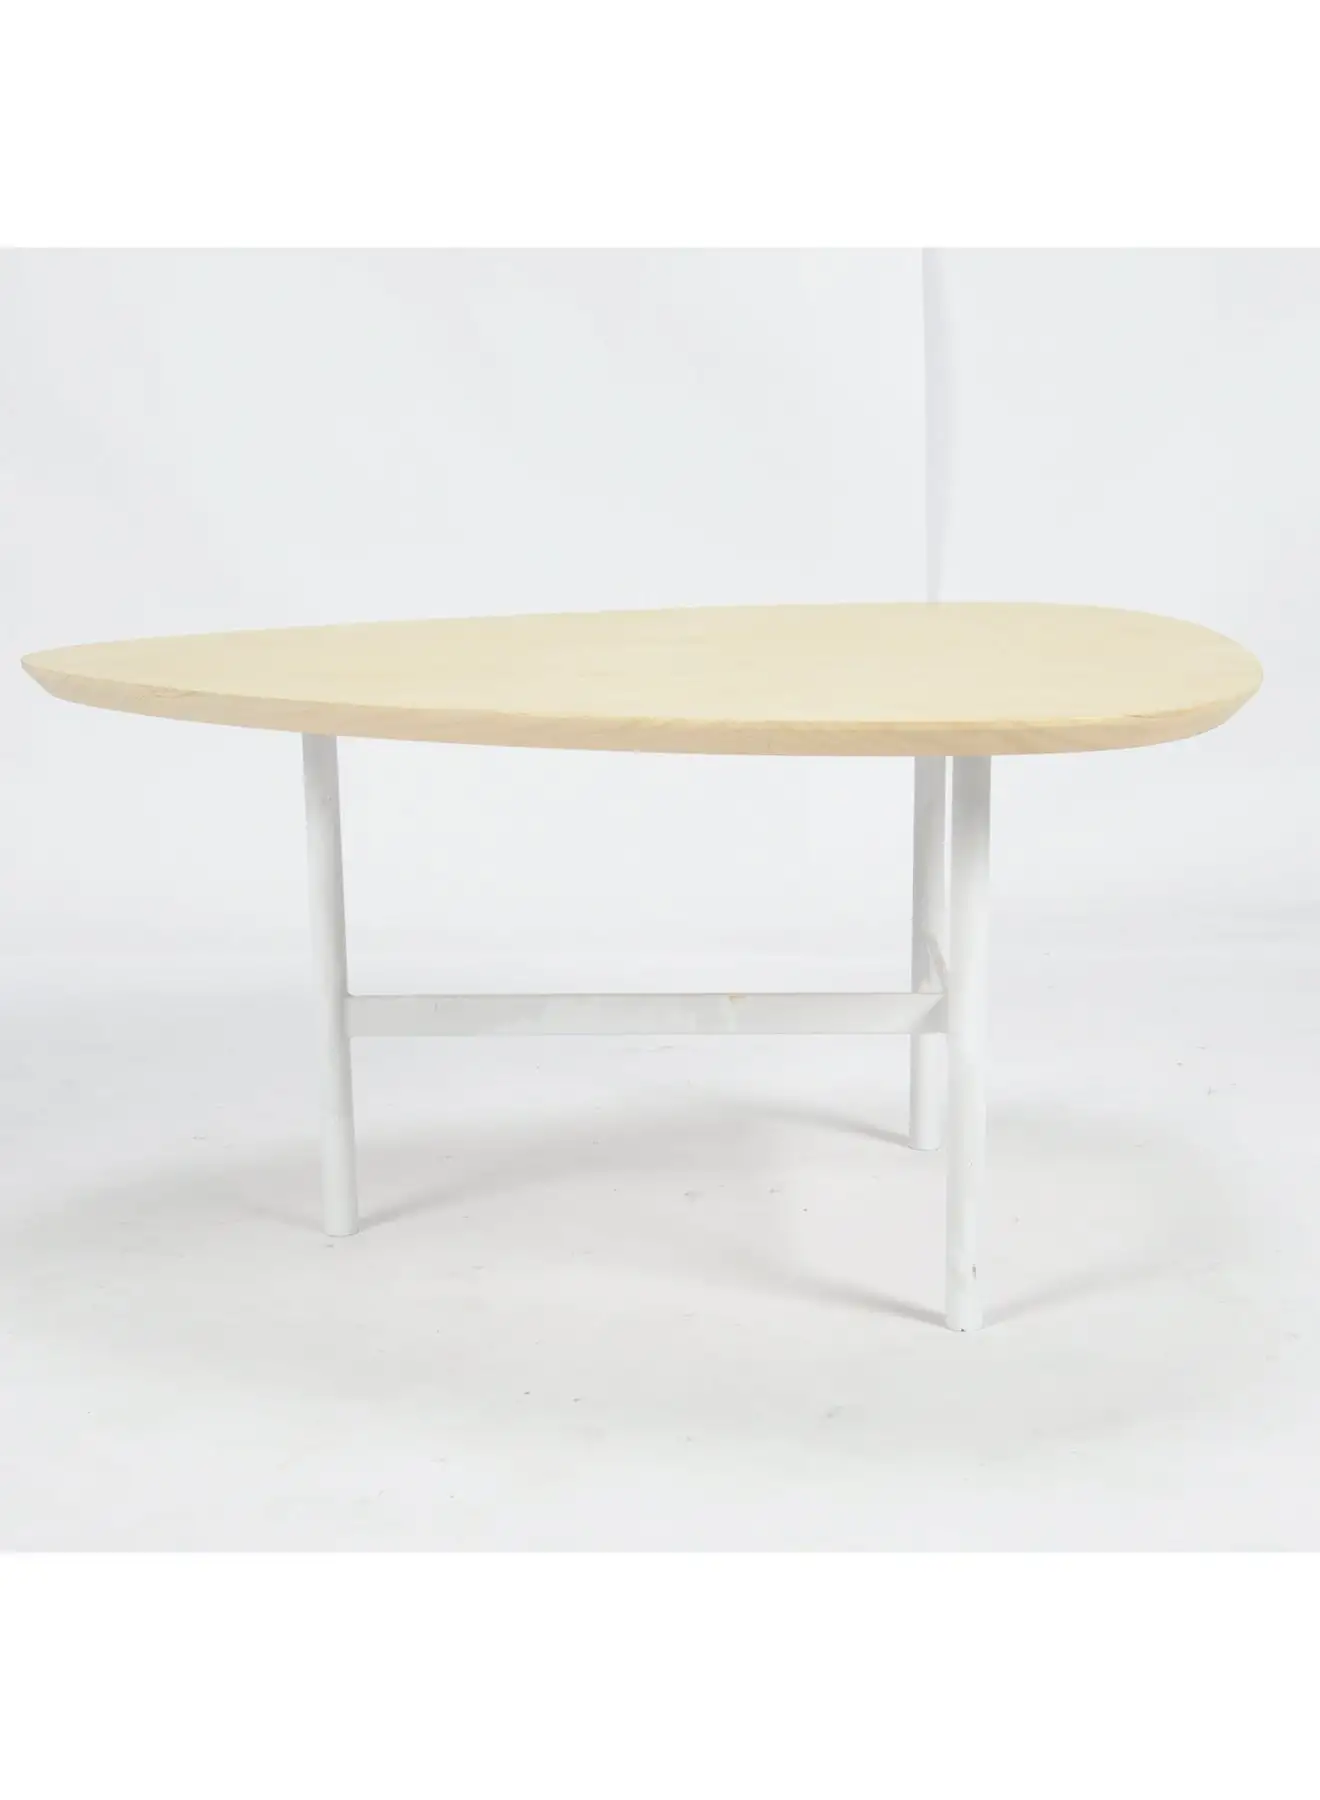 Switch Coffee Table Used As Coffee Corner And Side Table In Natural Wood - Size 88X84X43cm